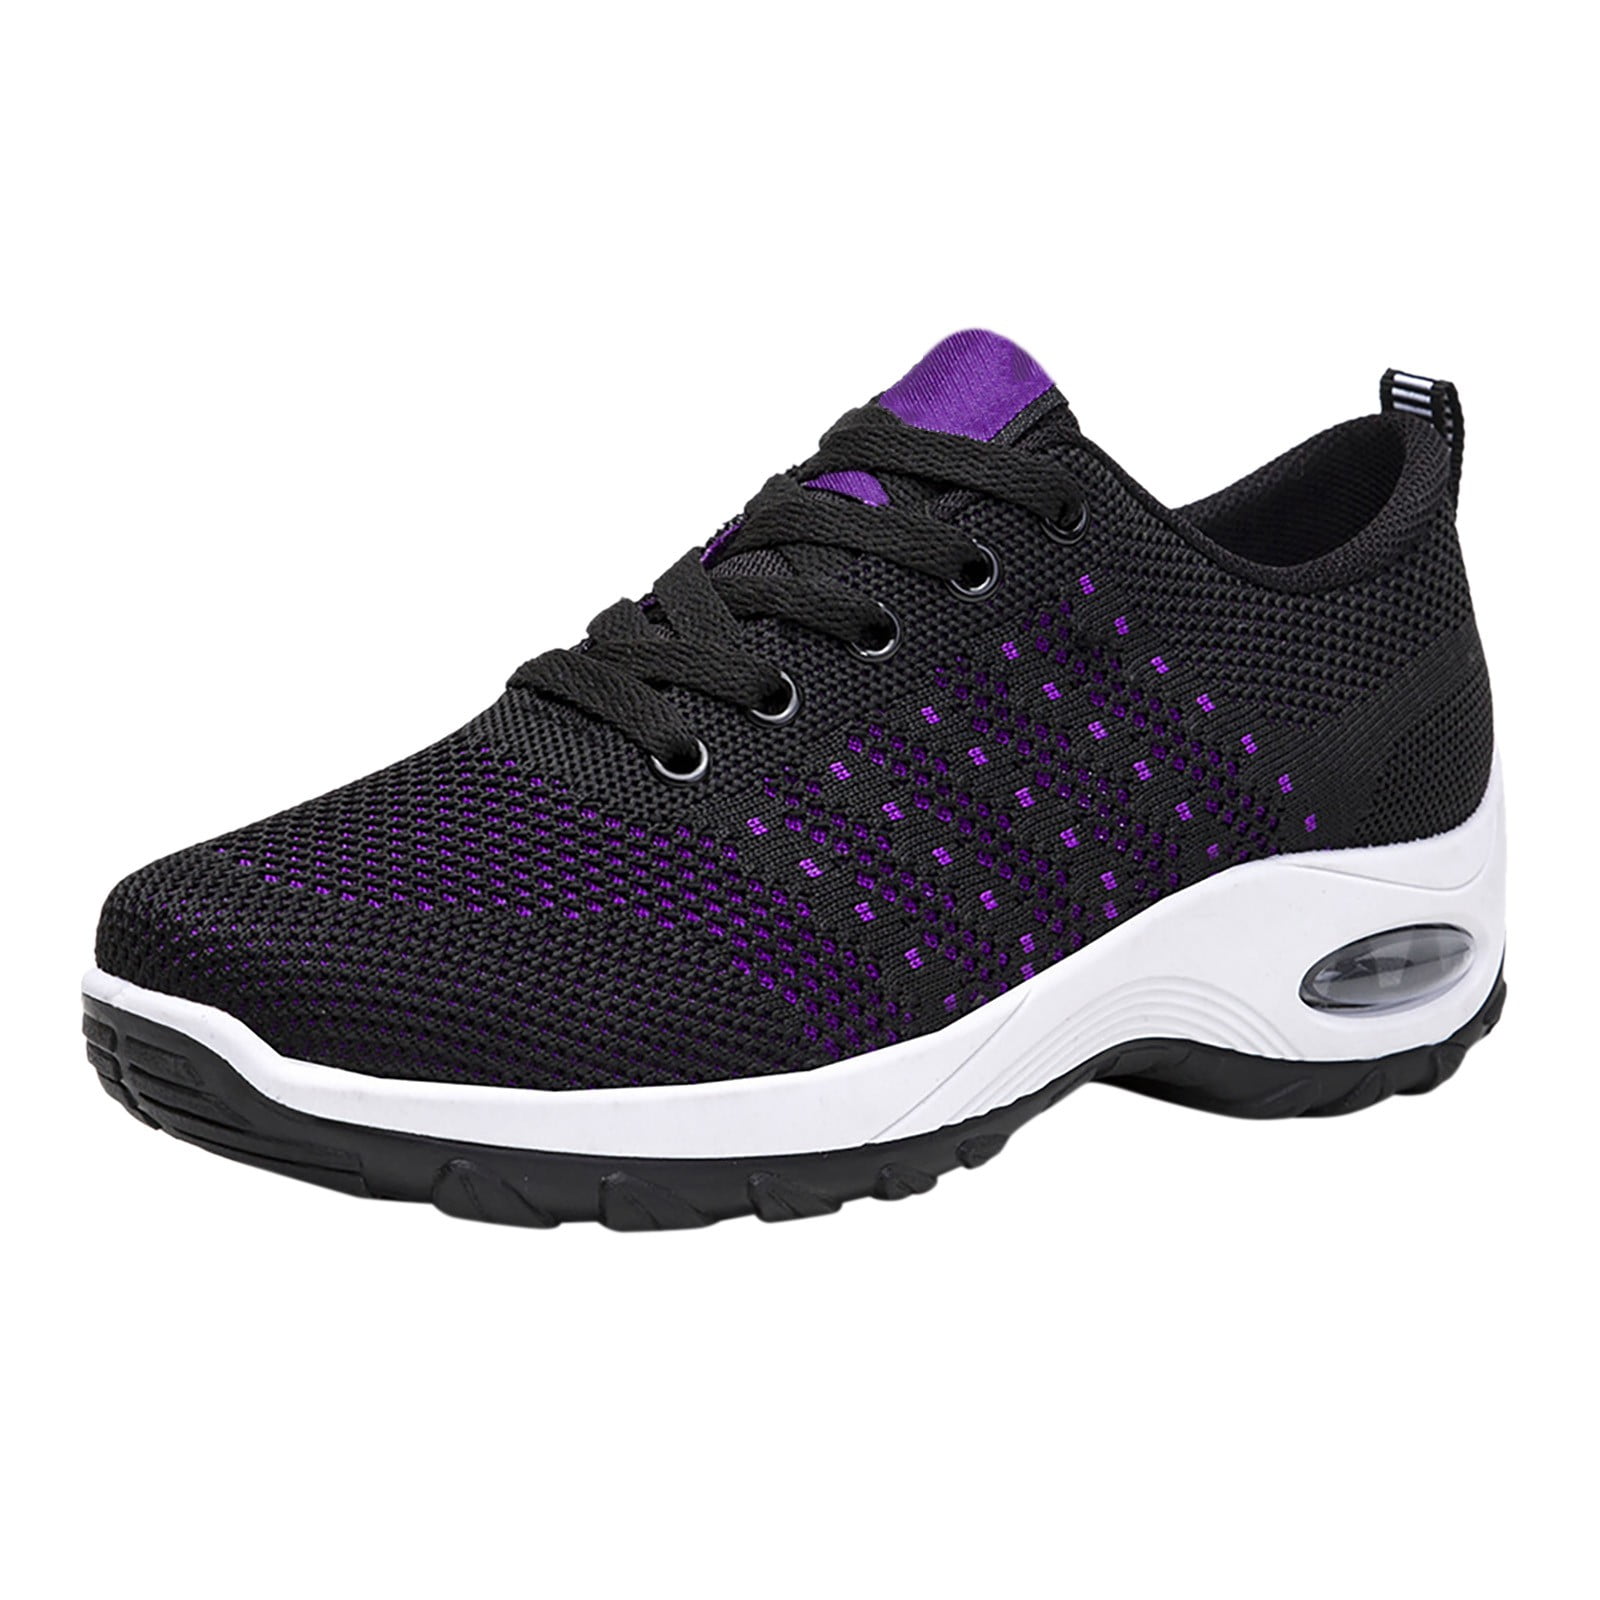 Fashion (black)New Women Casual Sneakers Platform Female Shoes Mesh  Breathable Sports Lightweight Comfortable Fashion Designer Ladies Footwear  ACU @ Best Price Online